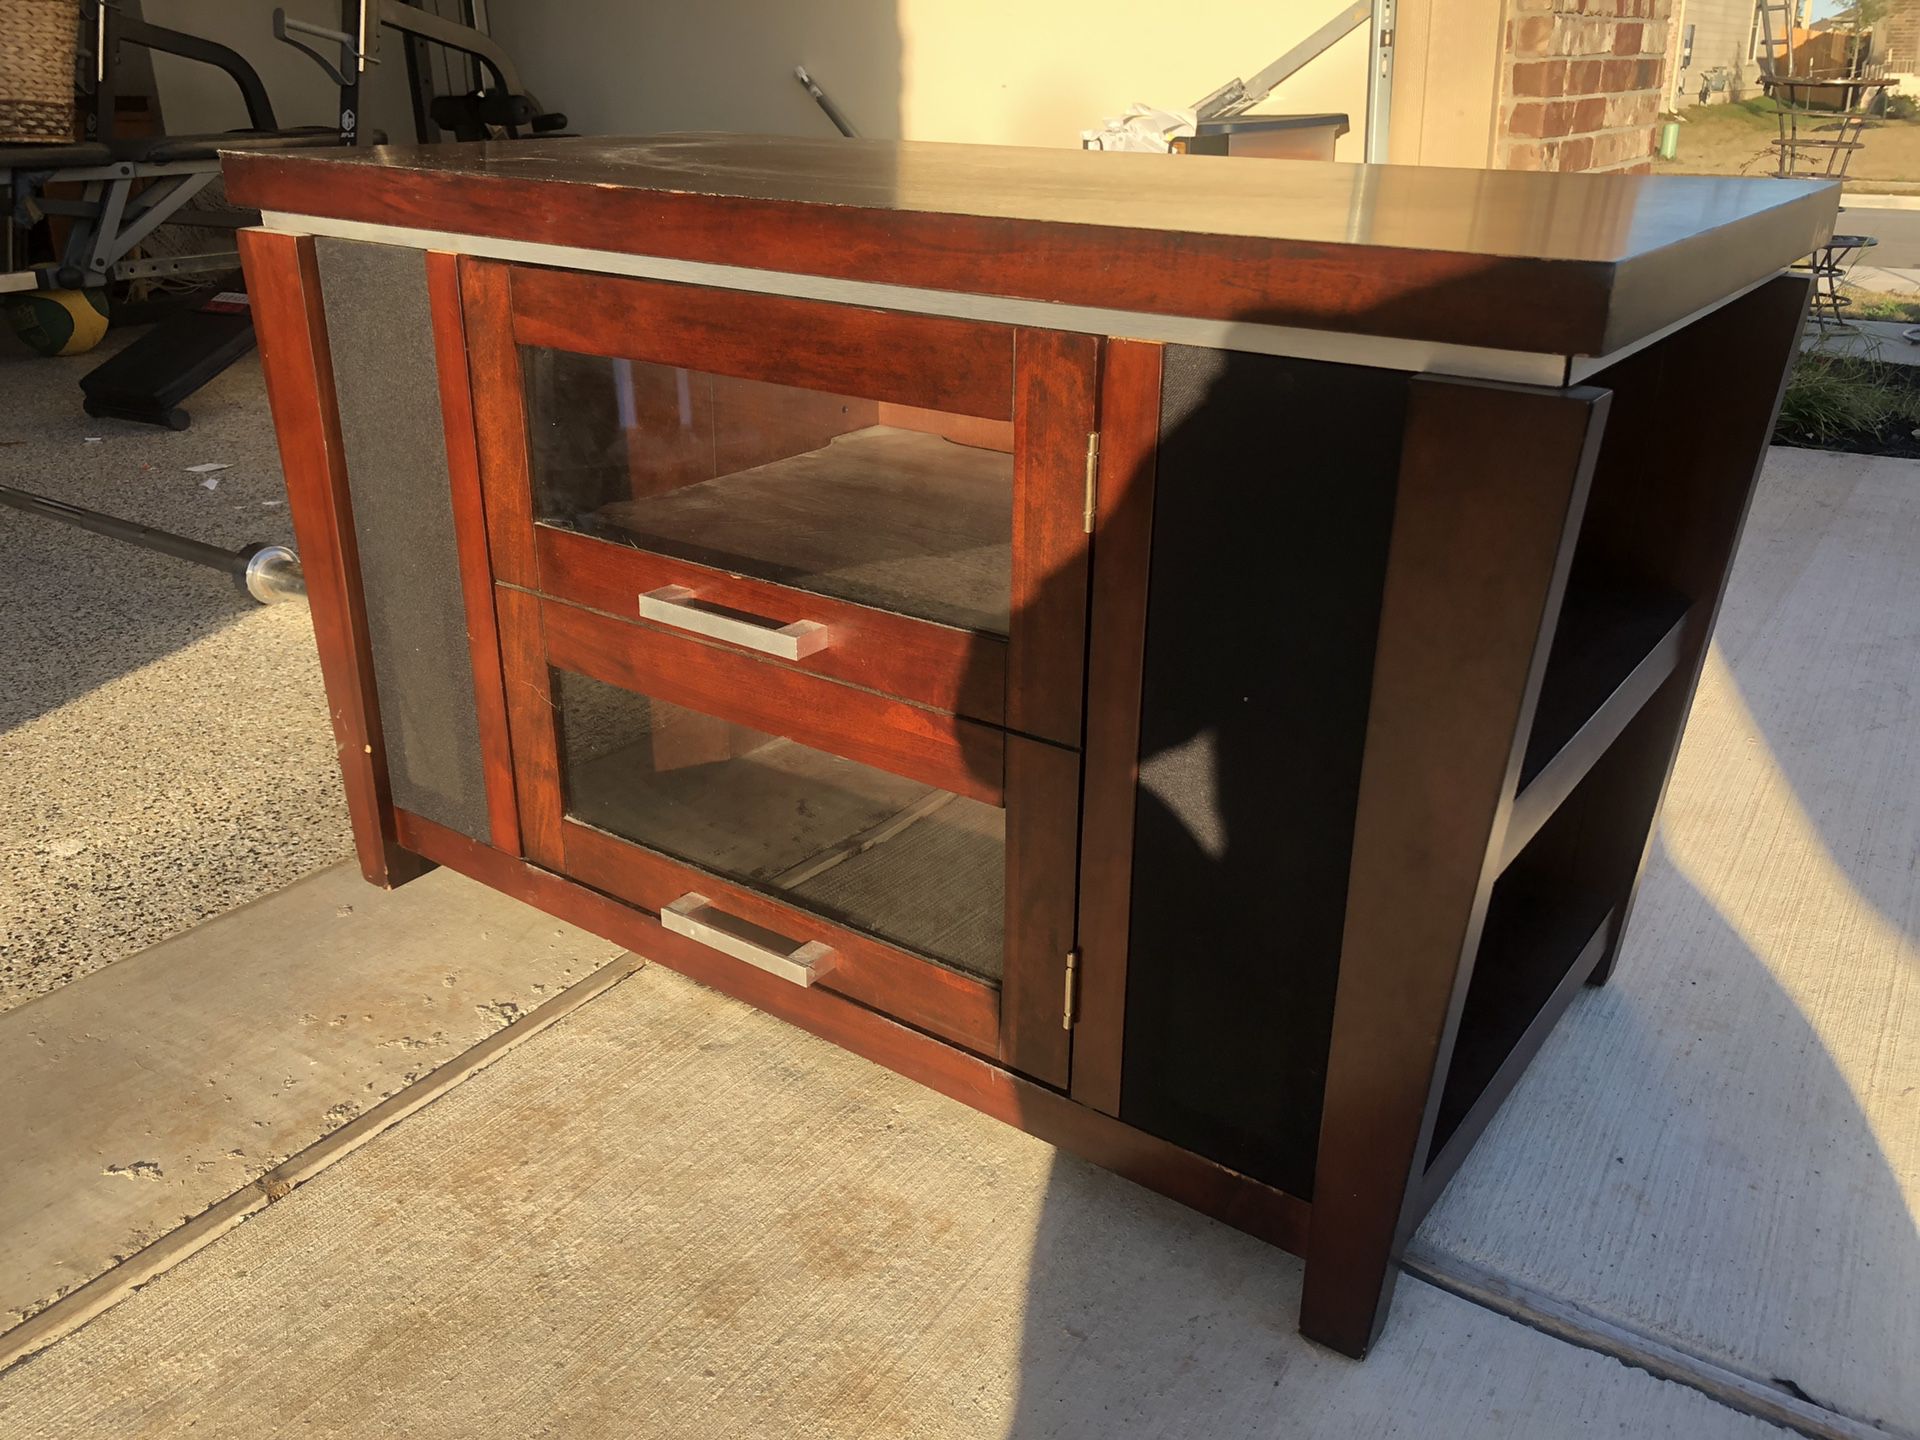 Tv stand 2ft tall by 40 inc long and 20 1/2 inch wide